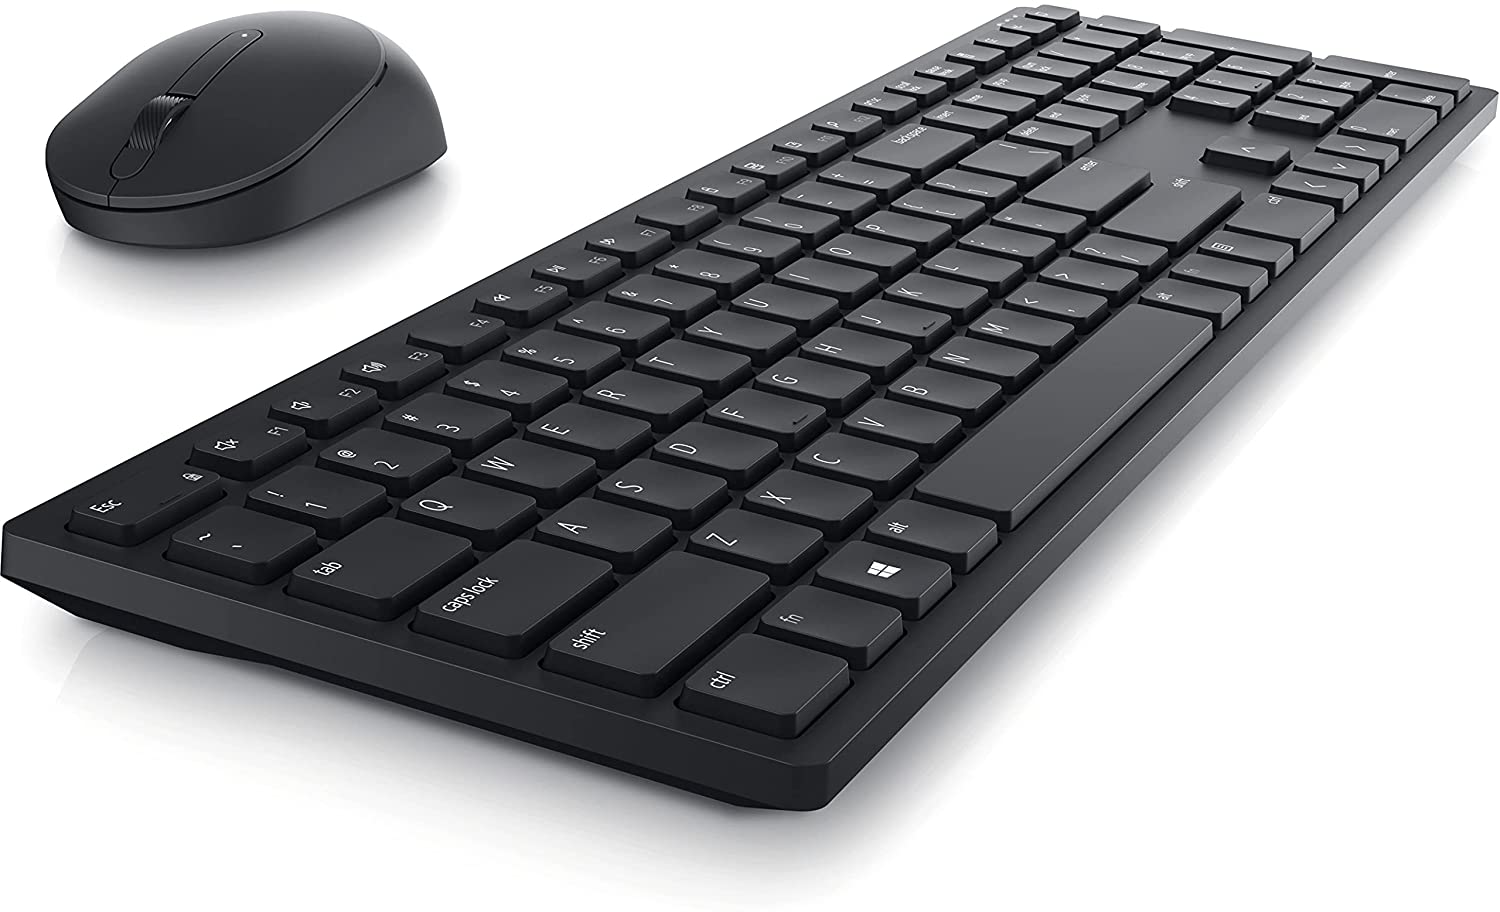 Dell KM5221W Pro Wireless Keyboard and Mouse Combo, Programmable Keys and Battery Indicator Light - Black